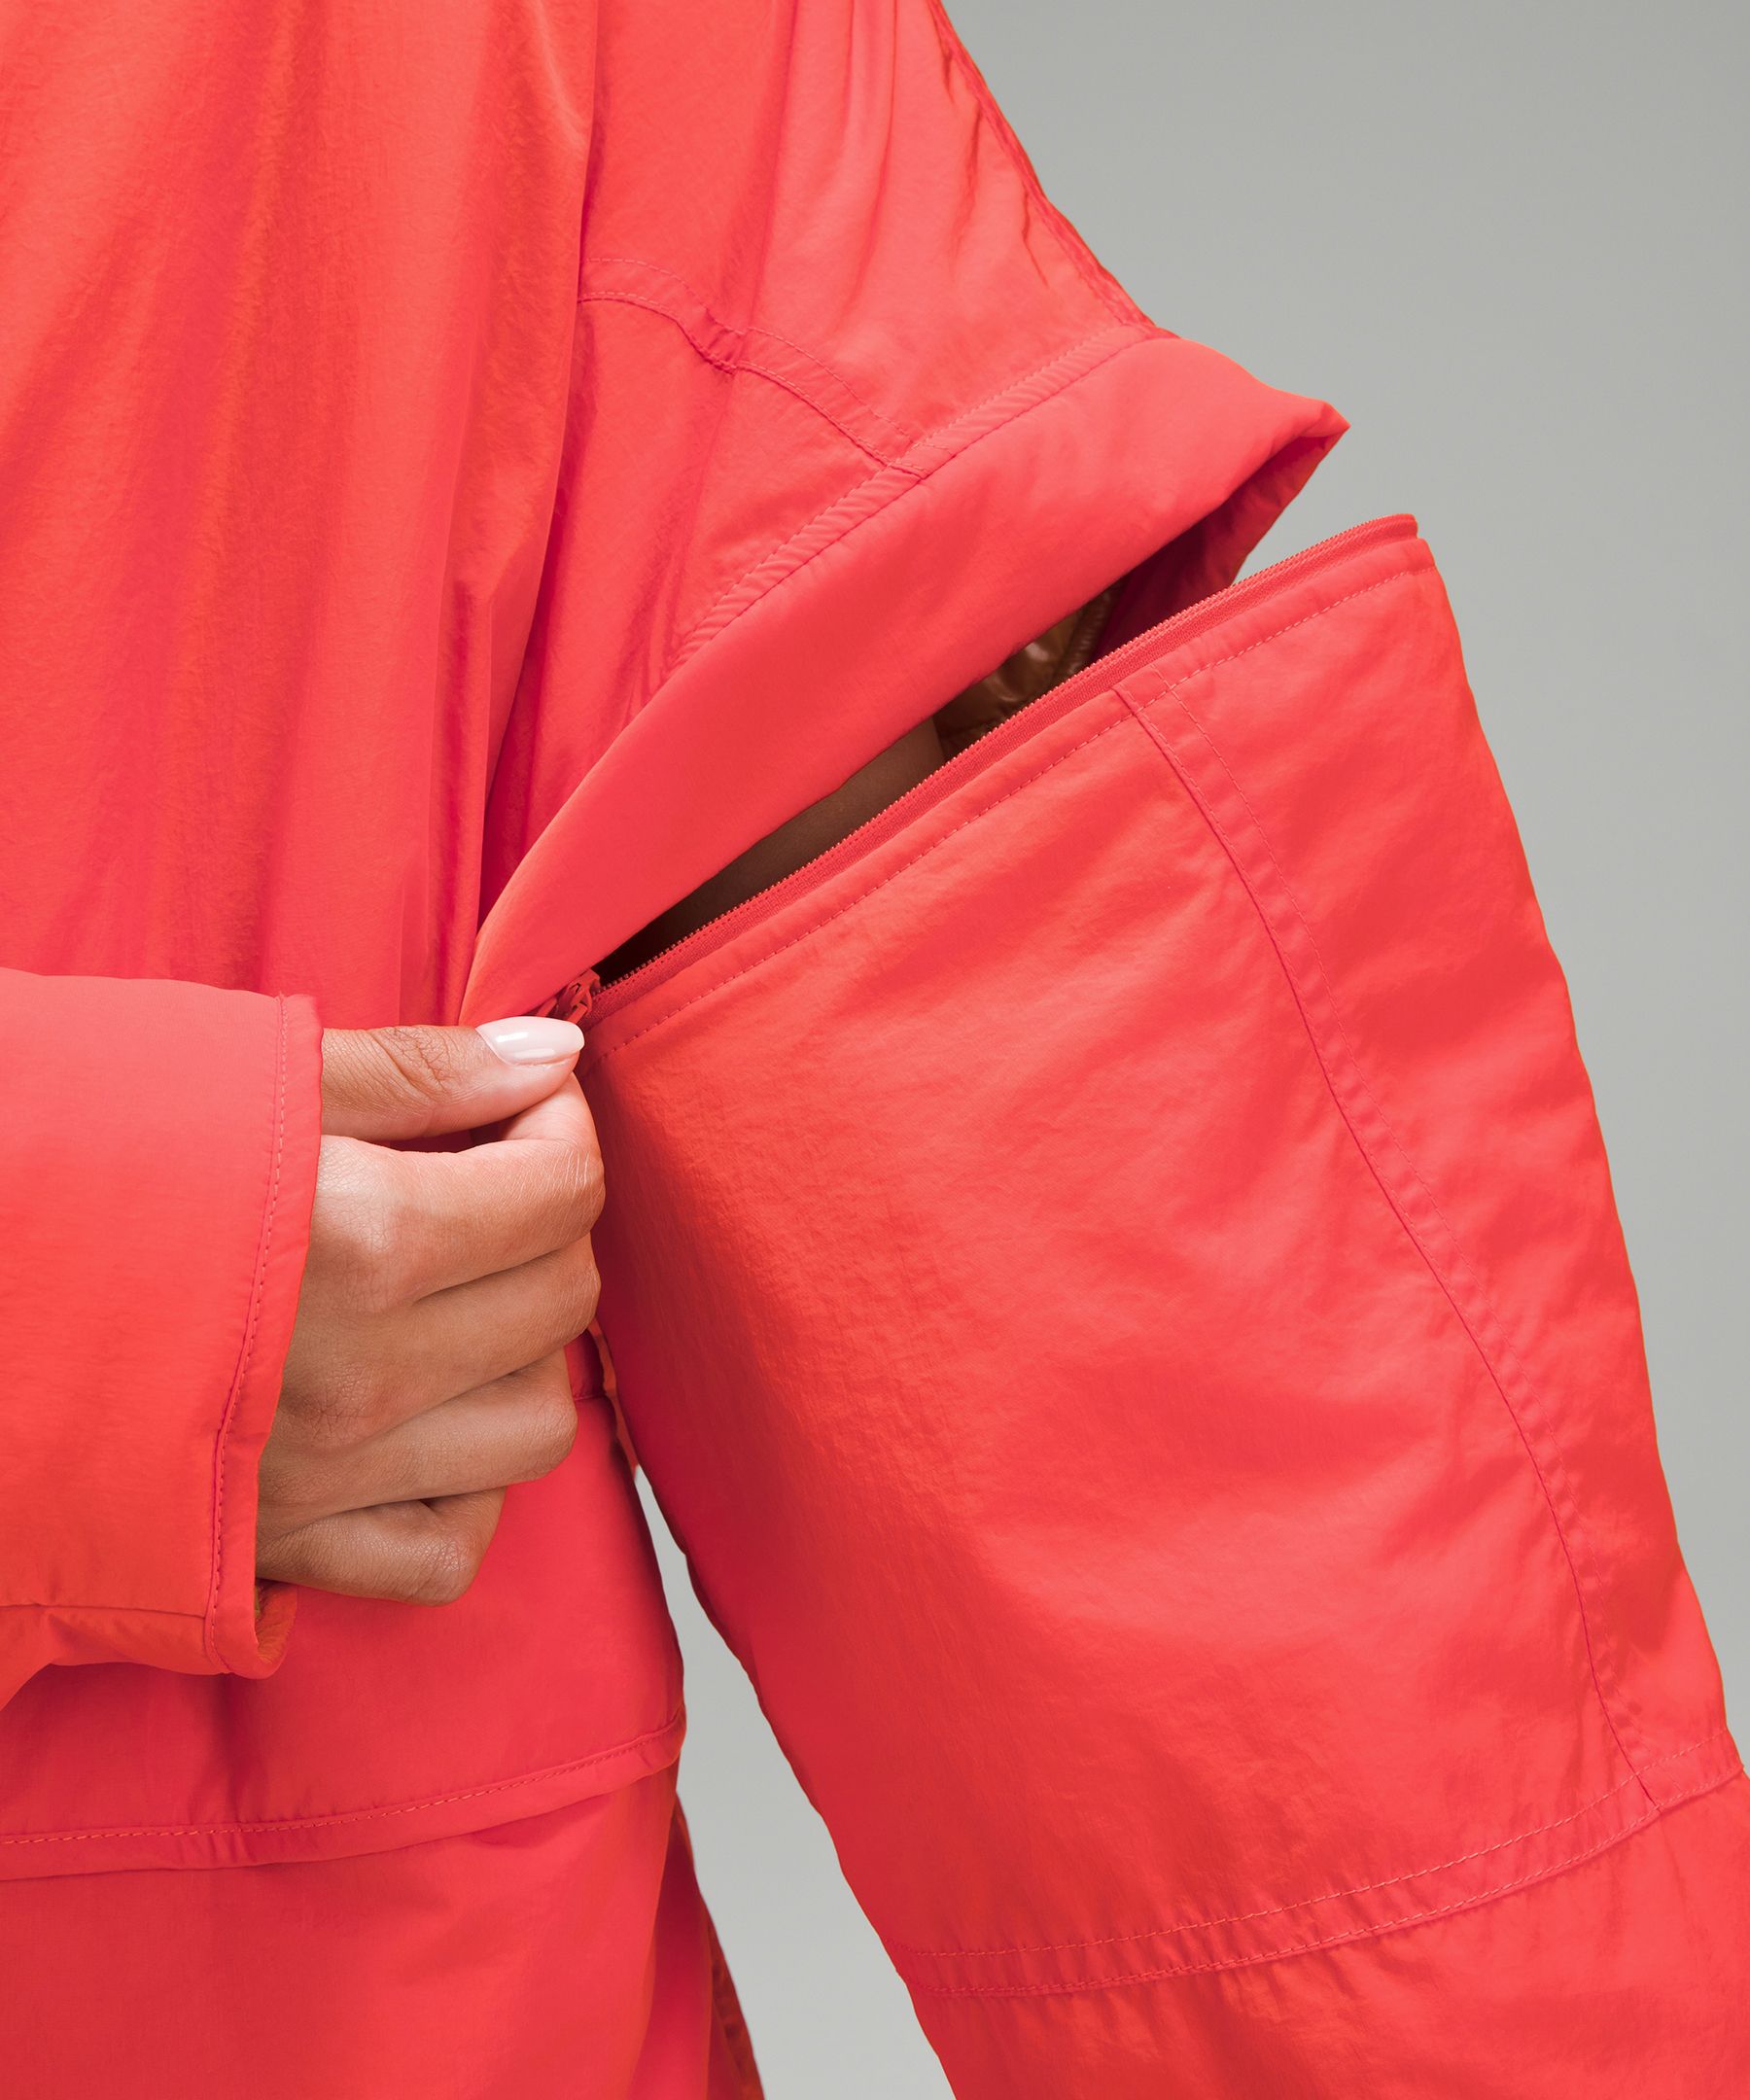 Get 2 in 1 convertible jackets at Flat 50% off!